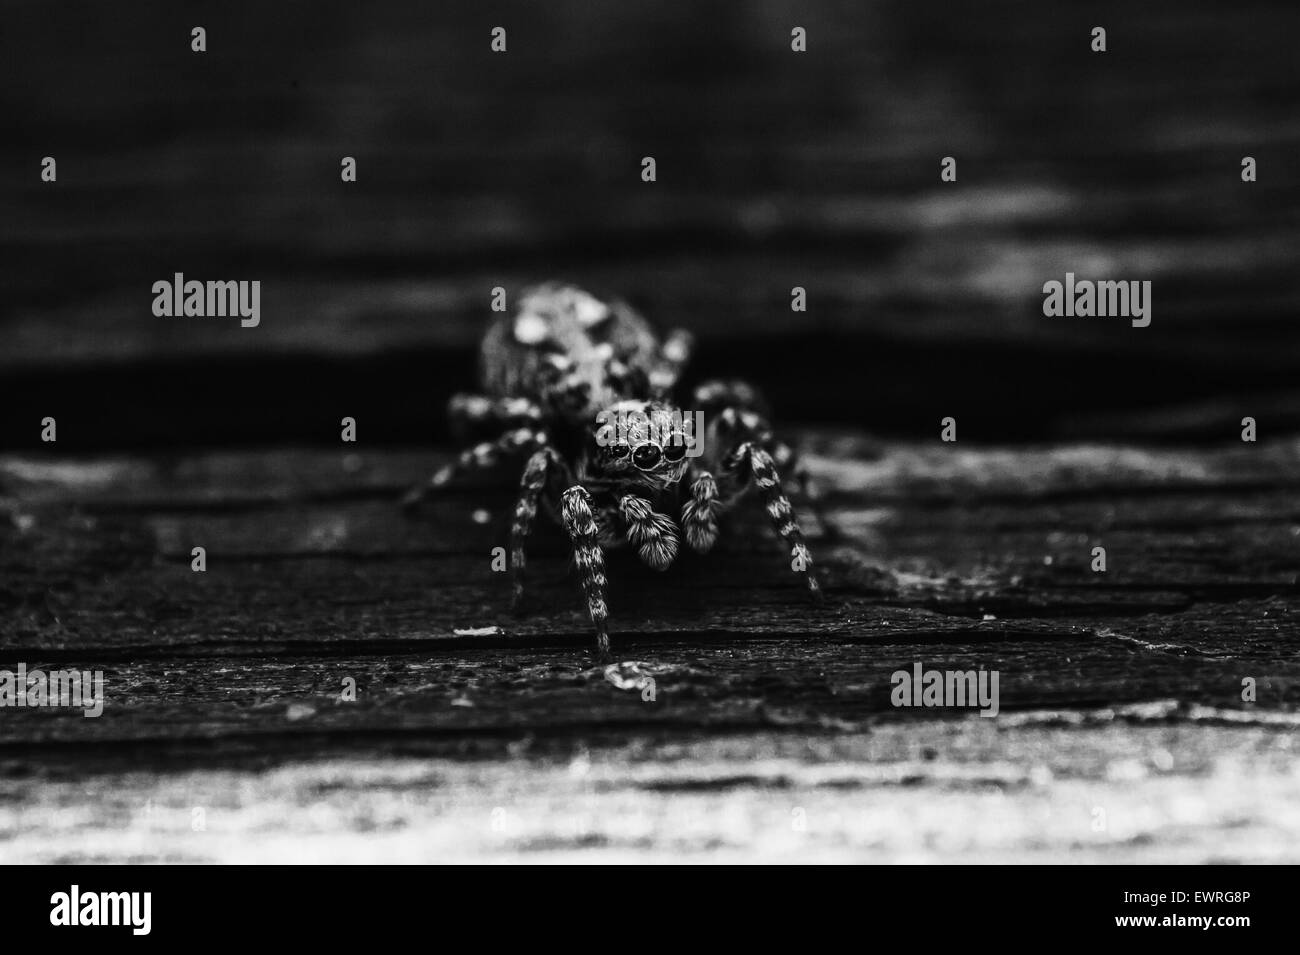 close up photograph of jumper spider Stock Photo